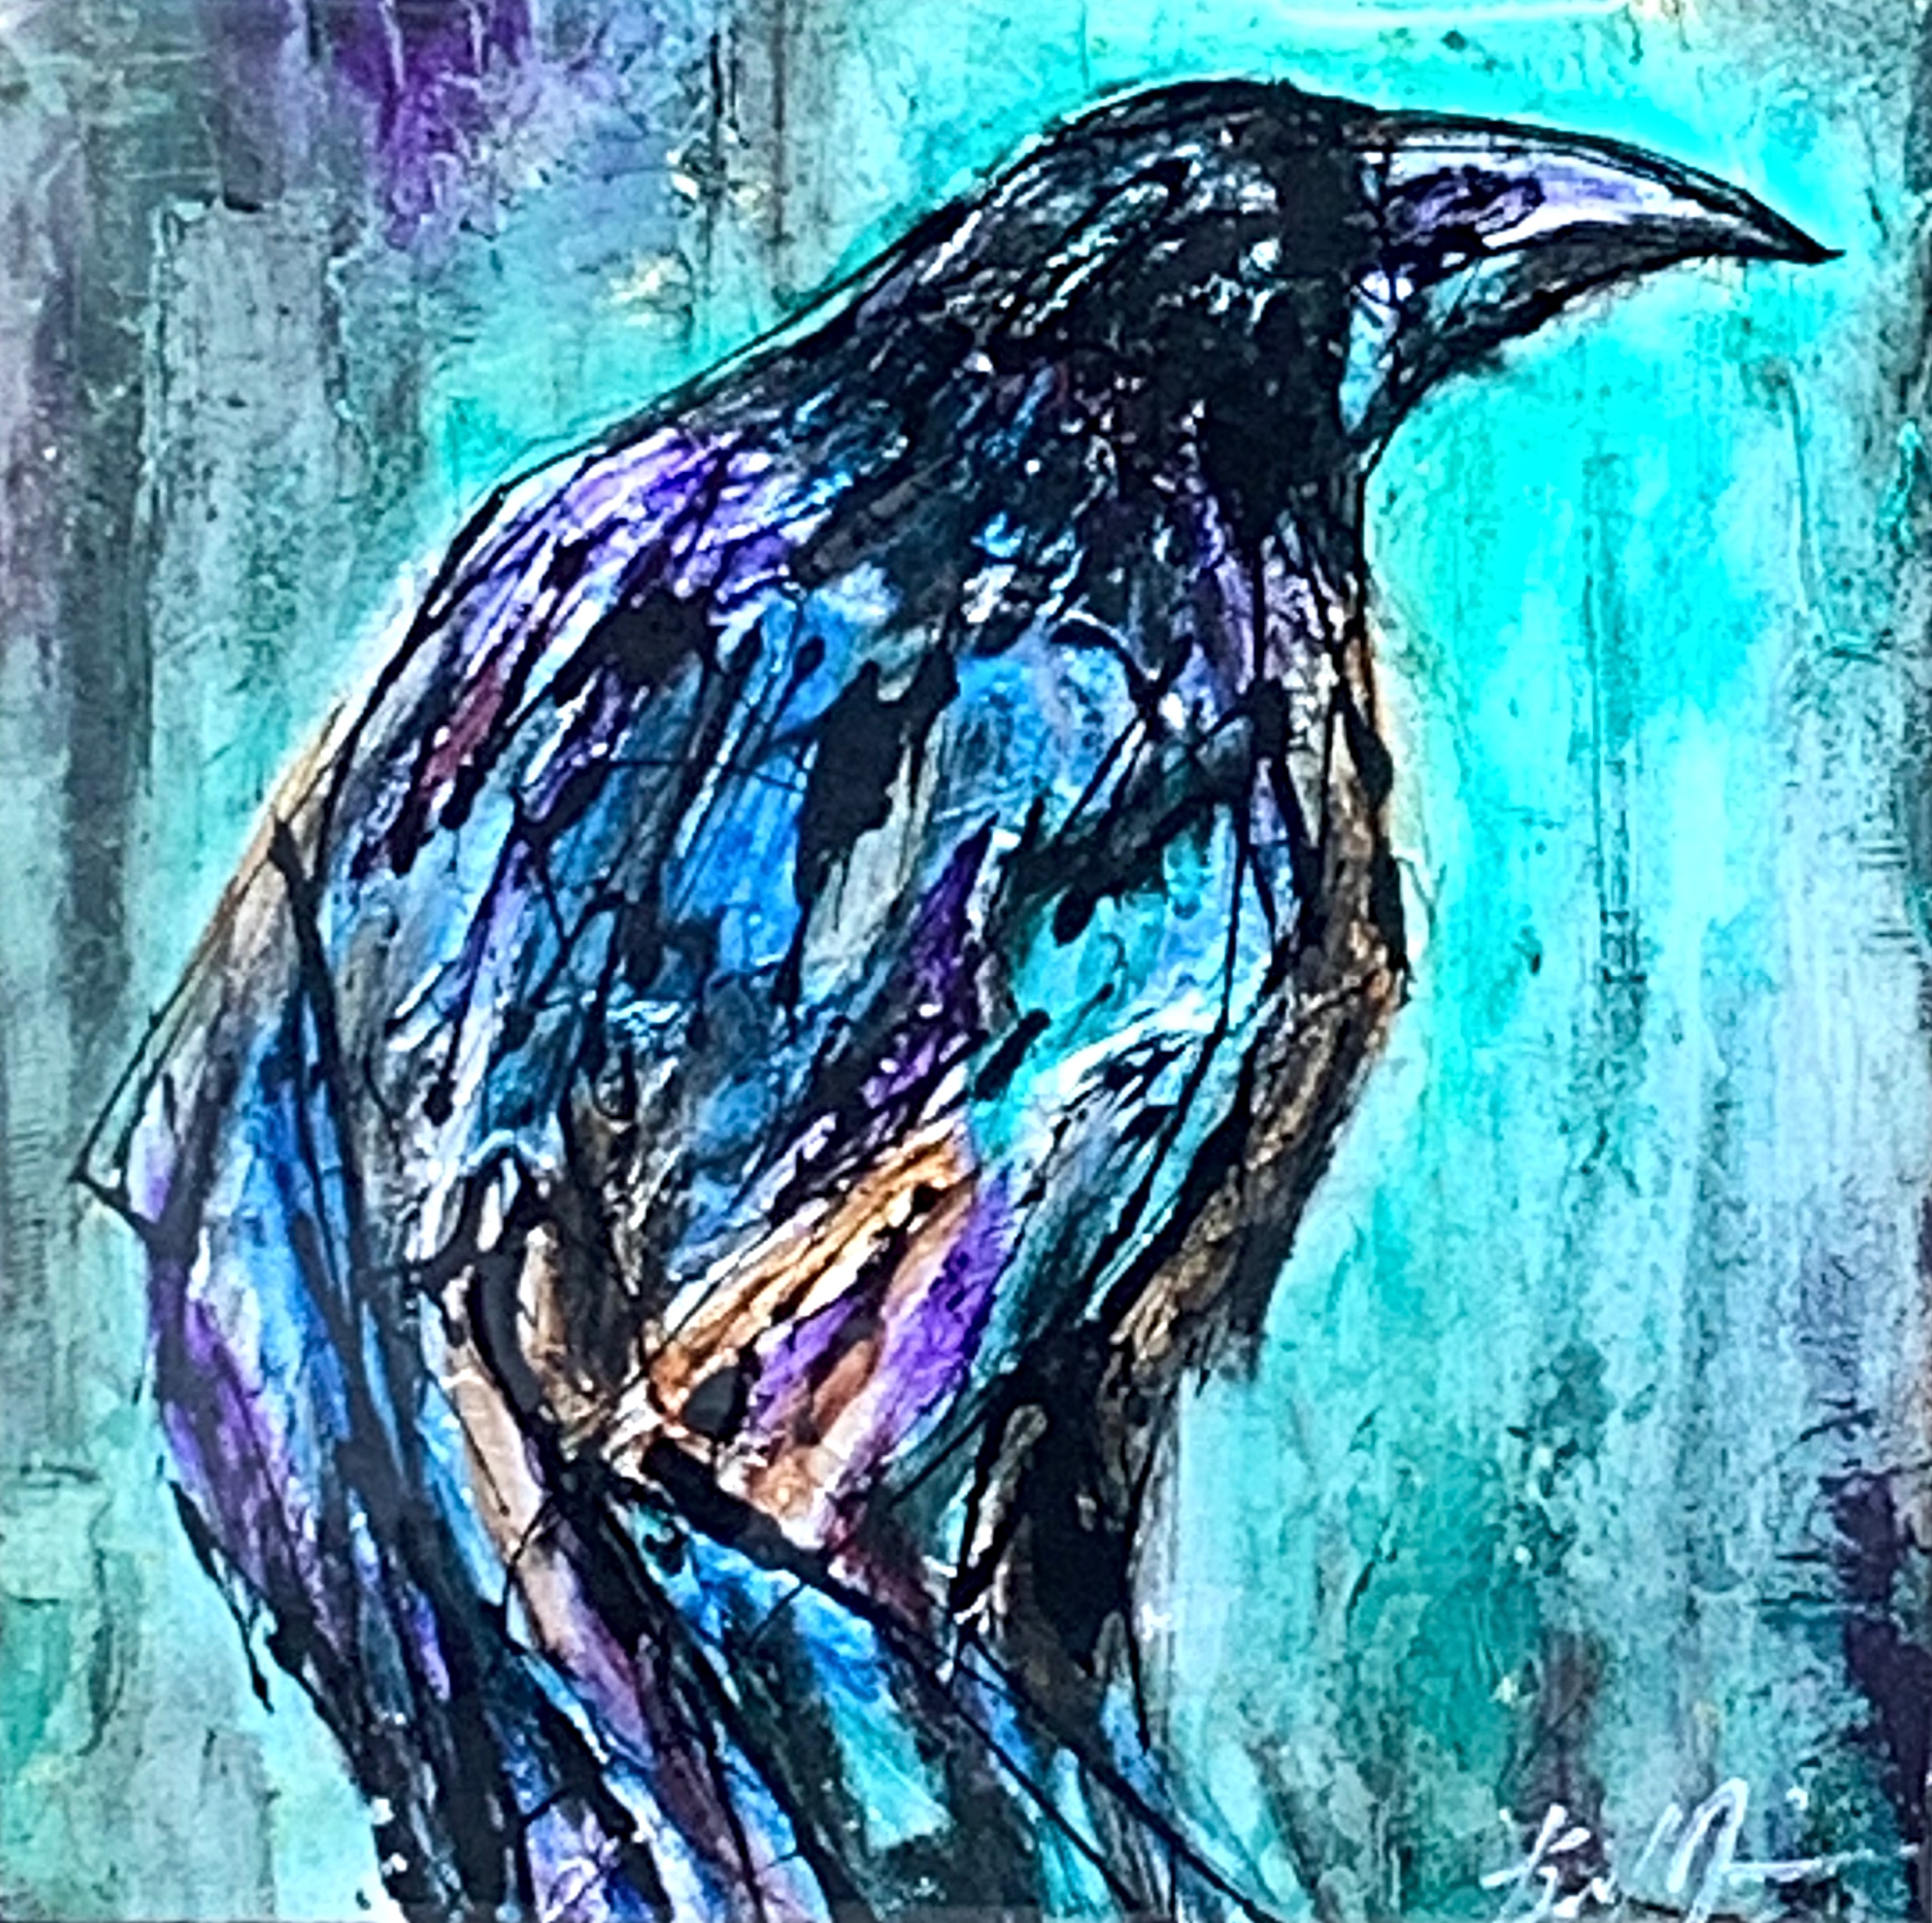 Crime, mixed media crow painting by David Zimmerman | Effusion Art Gallery +  Cast Glass Studio, Invermere BC